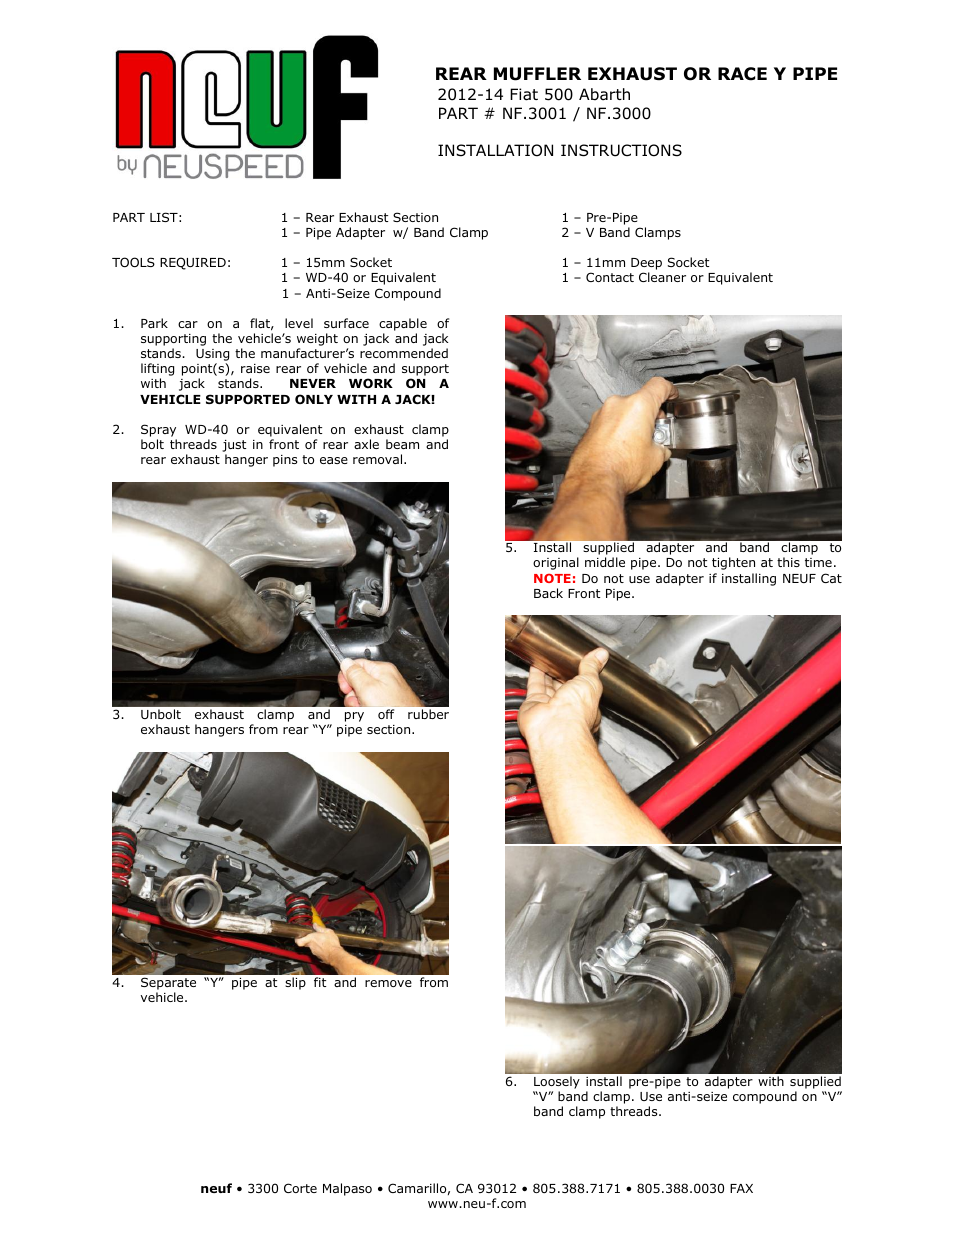 Neu-F NF.3000 User Manual | 2 pages